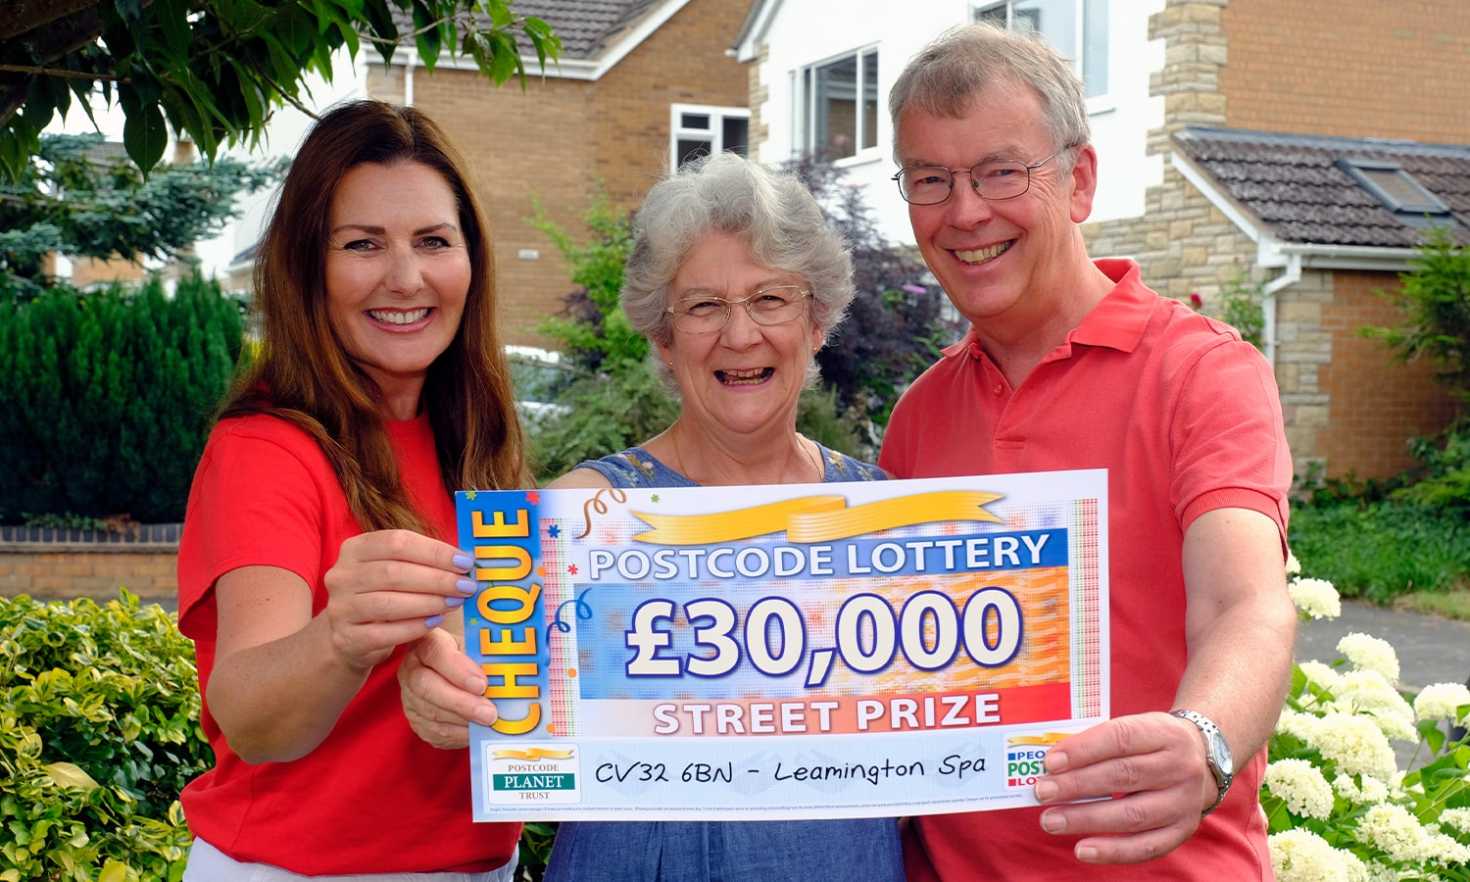 One of our lucky Street Prize winners celebrating with Judie in Leamington Spa